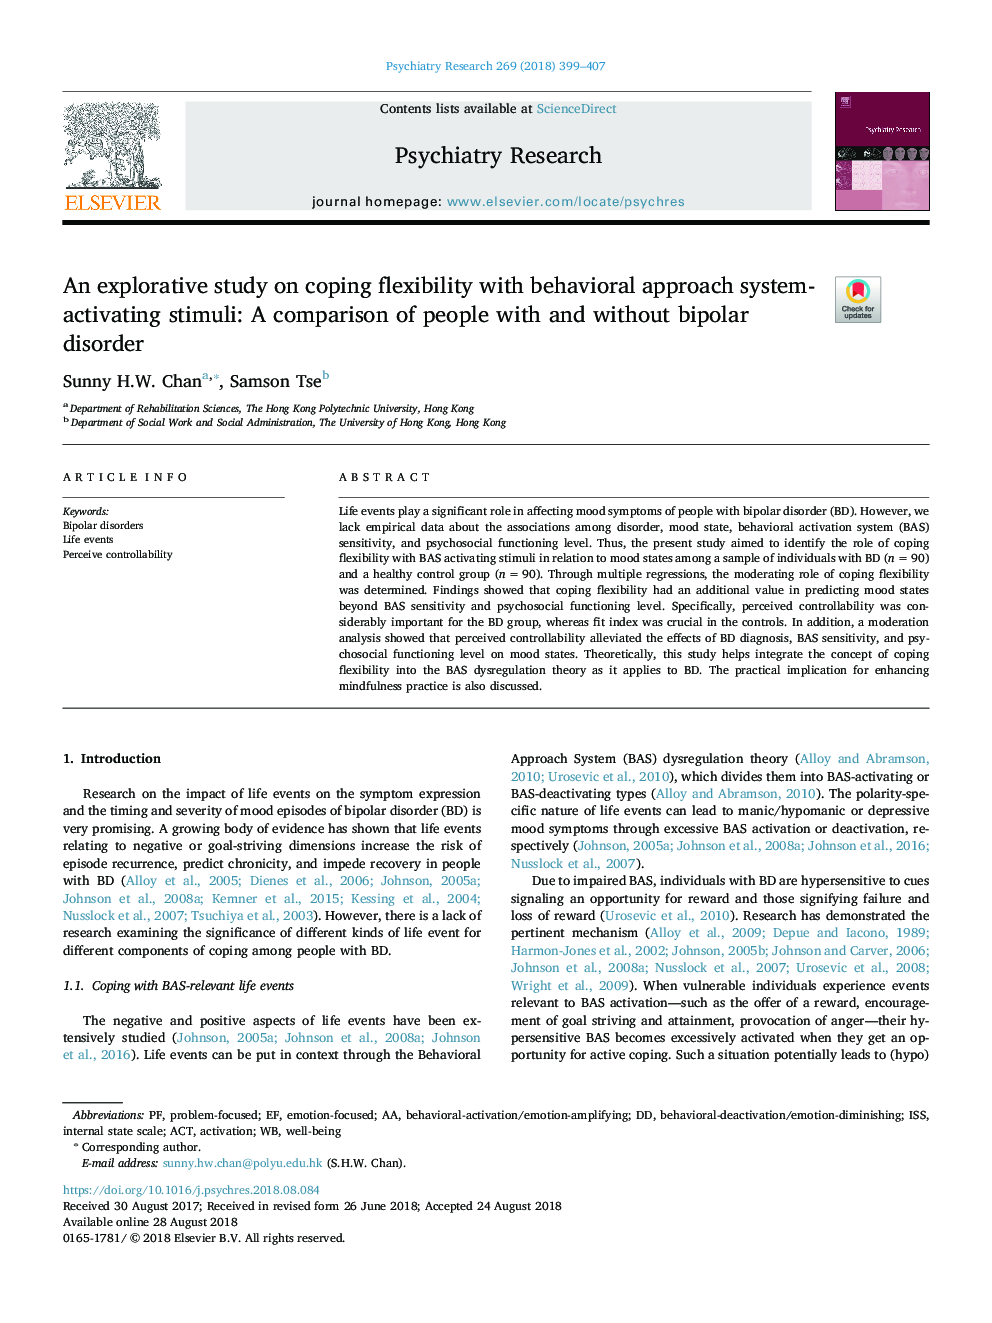 An explorative study on coping flexibility with behavioral approach system-activating stimuli: A comparison of people with and without bipolar disorder